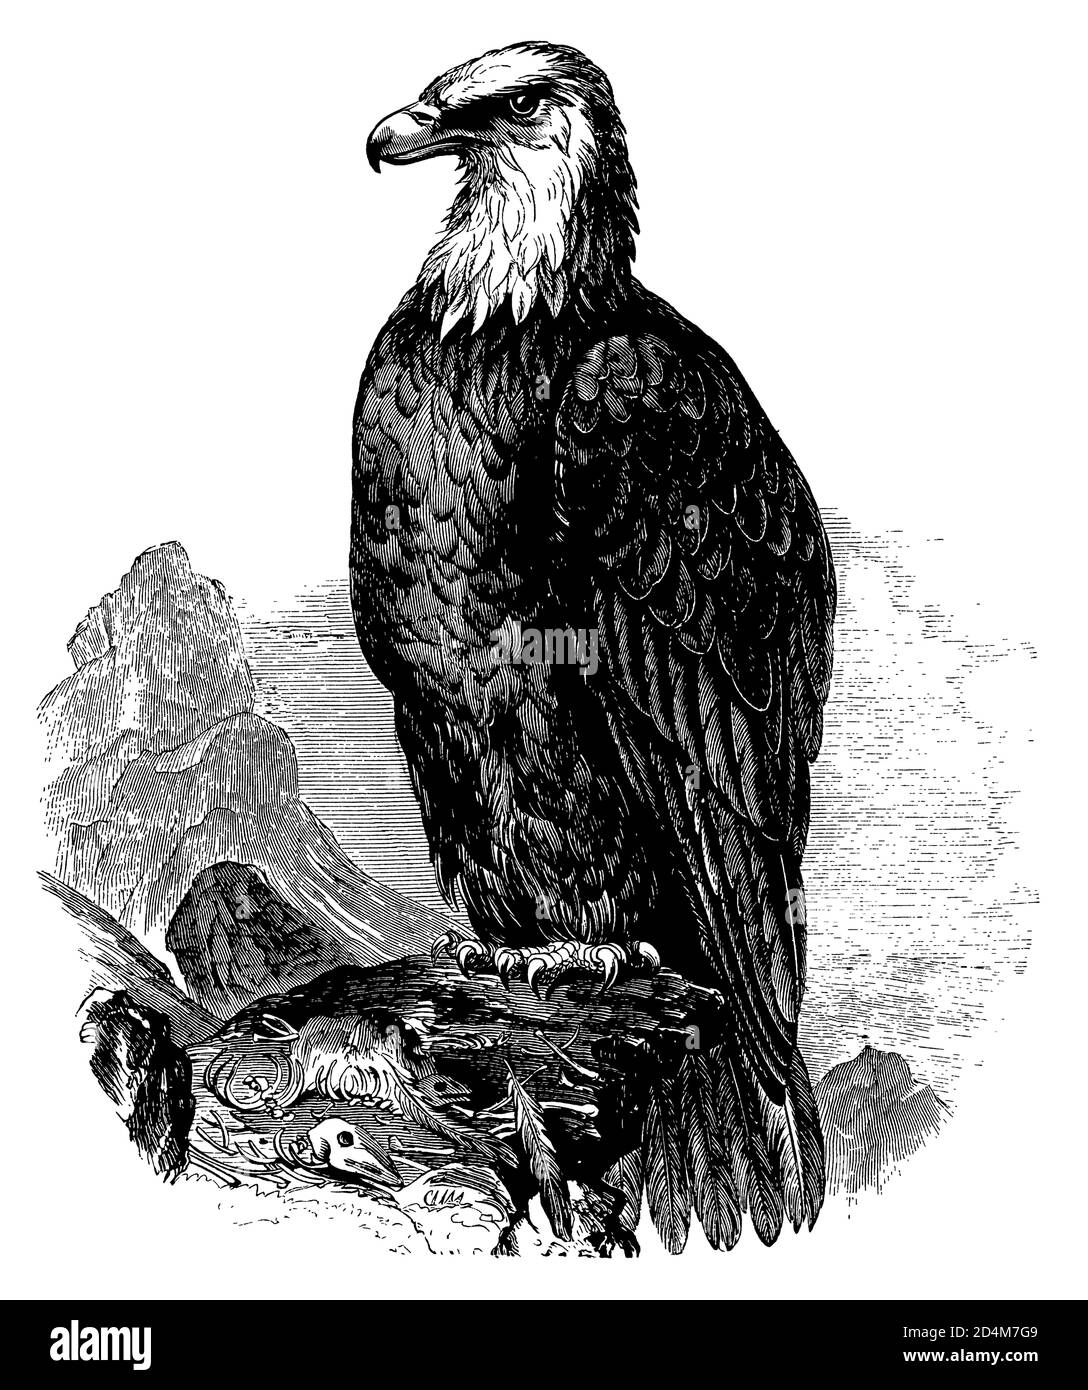 Classic engraving of a bald eagle (isolated on white). Published in Systematischer Bilder-Atlas zum Conversations-Lexikon, Ikonographische Encyklopaed Stock Photo